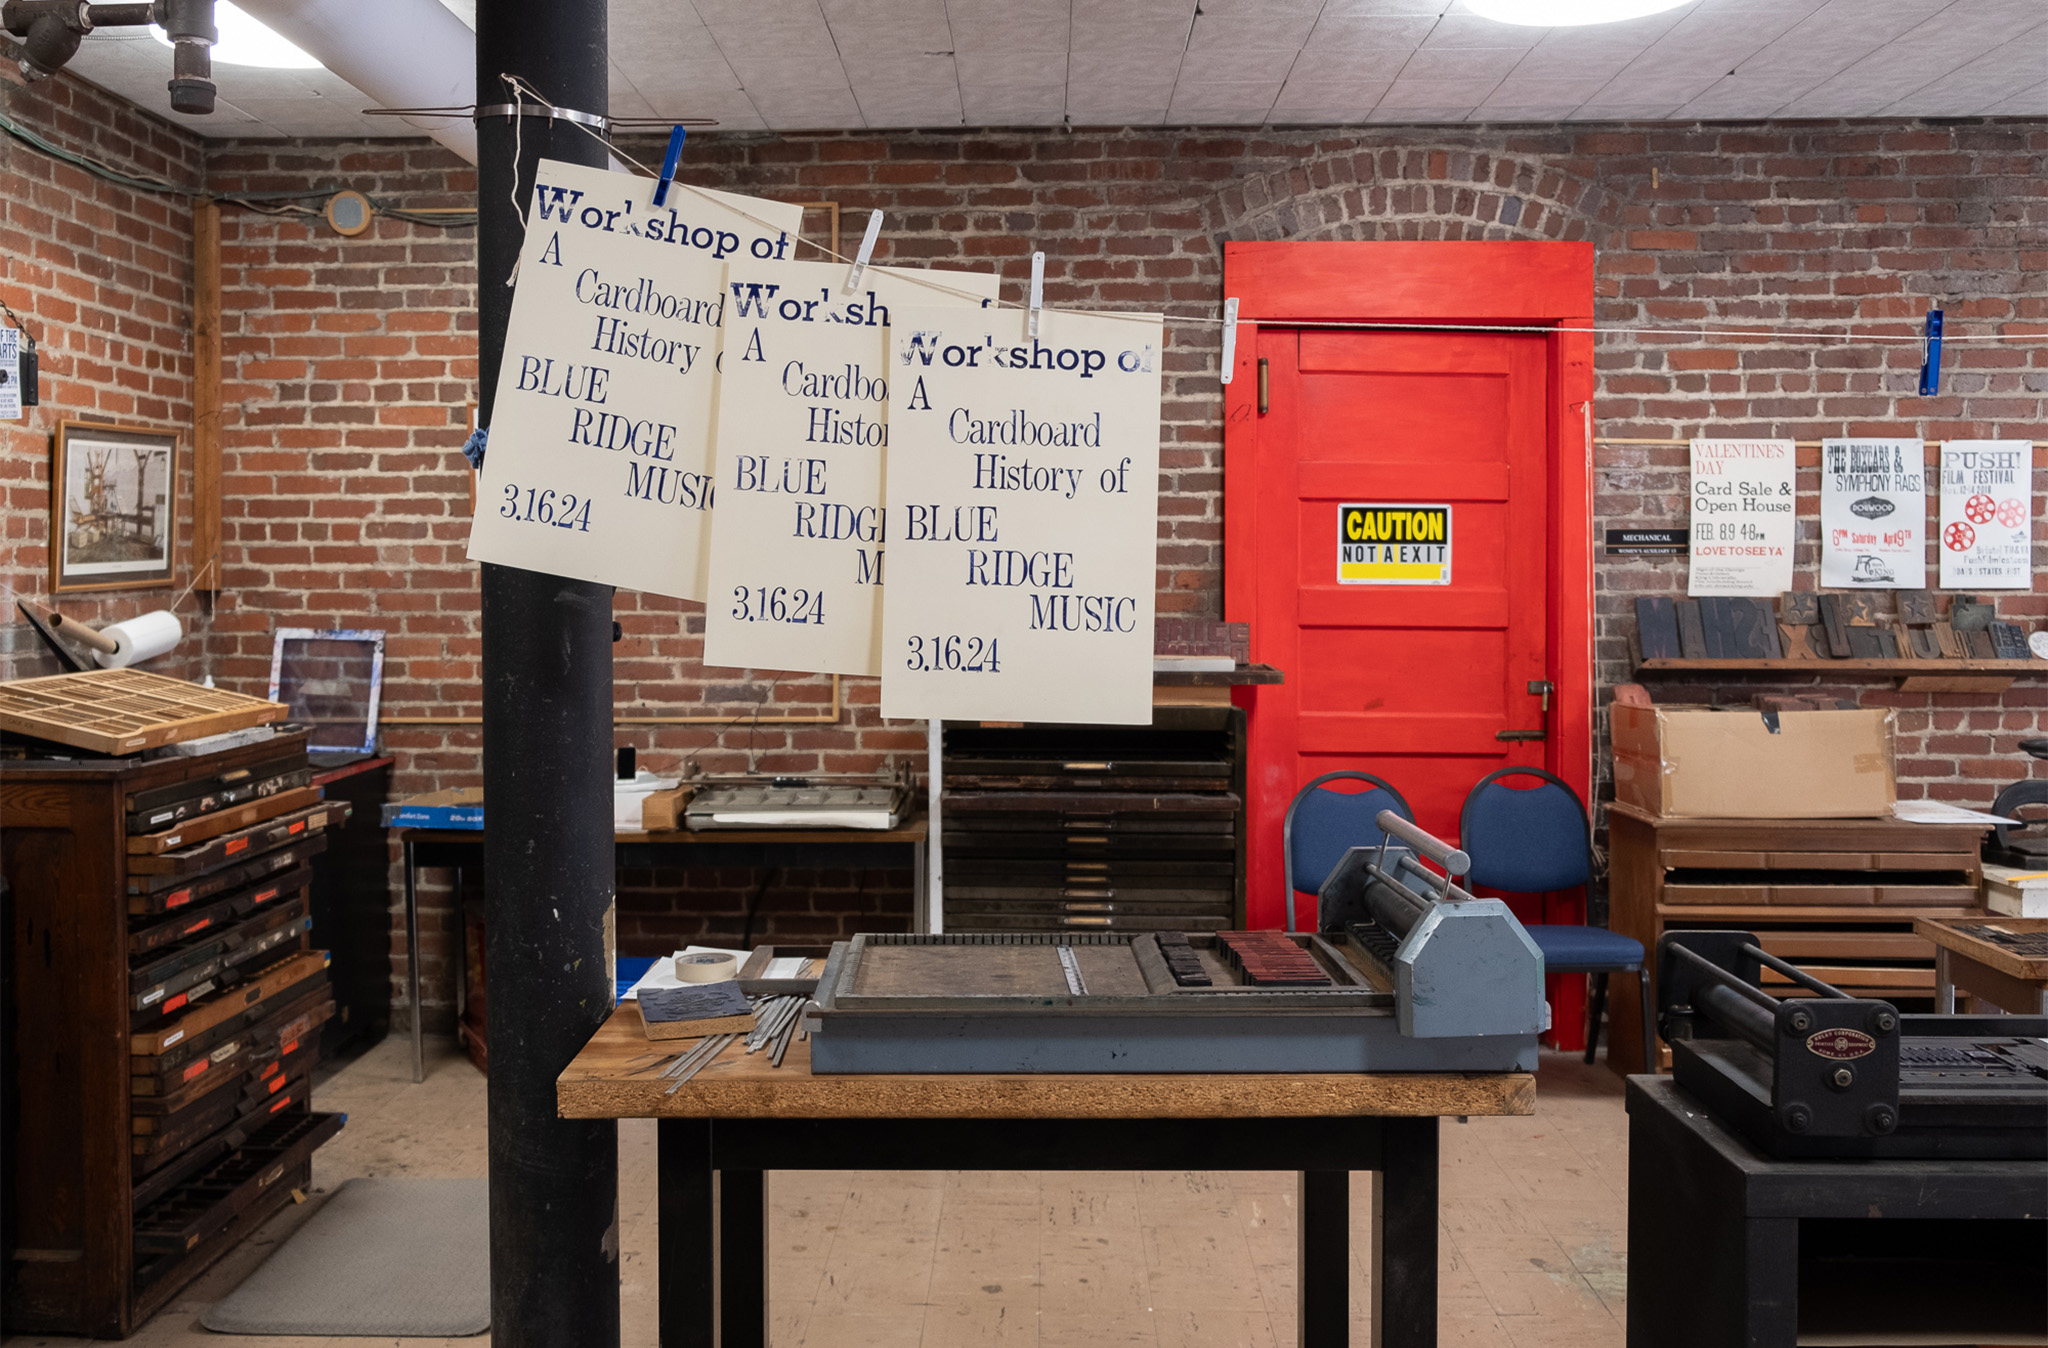 A brick-walled room with a table and letterpress printing equipment. There is a red door on the room's back wall and several letterpress printed folders hanging on a clothesline above the table. The posters including information about the March 16 letterpress workshop.